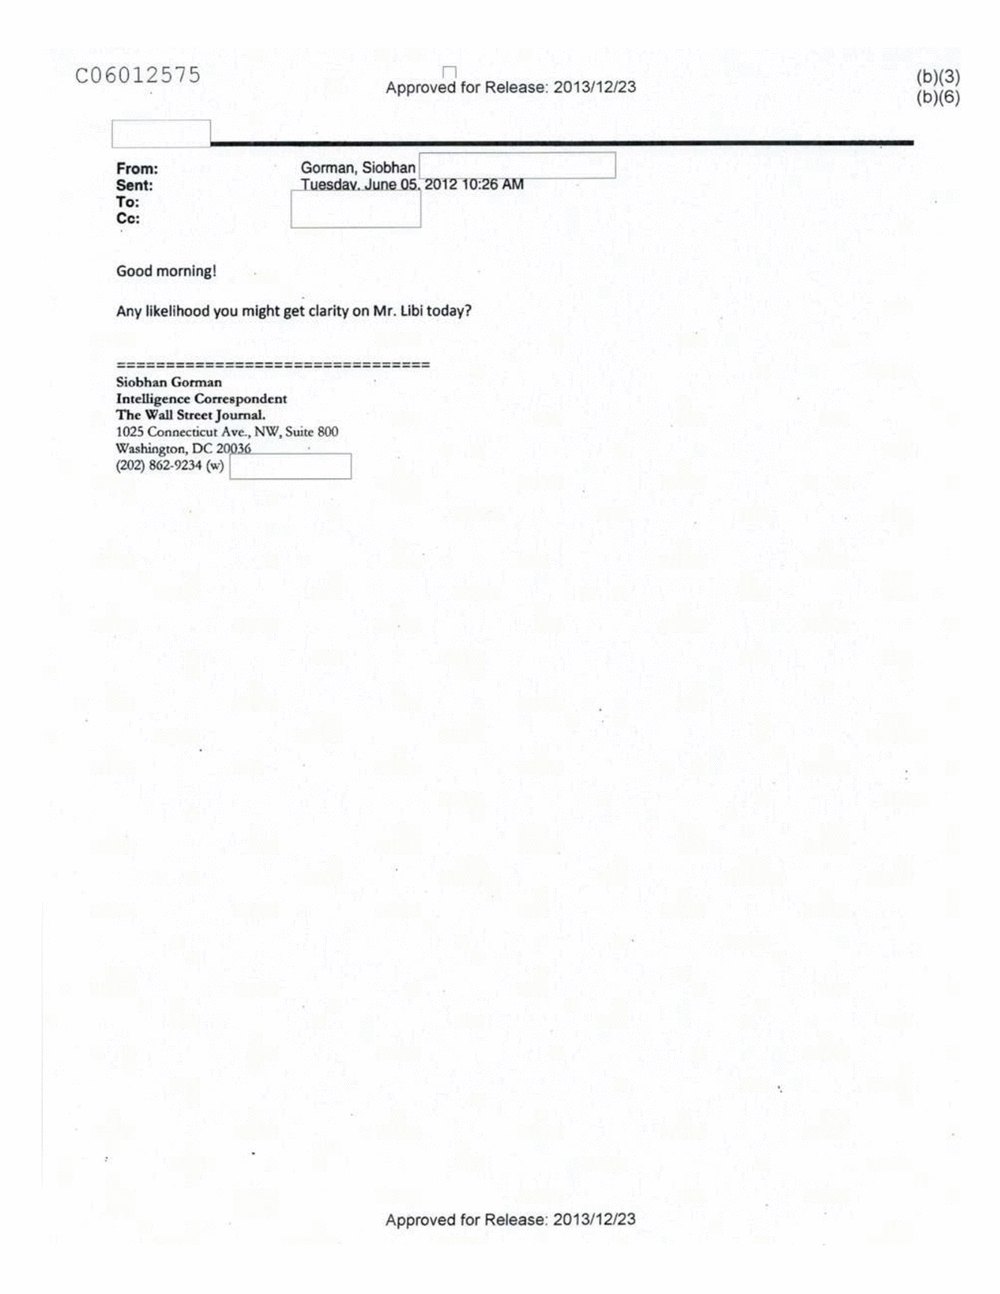 Page 110 from Email Correspondence Between Reporters and CIA Flacks